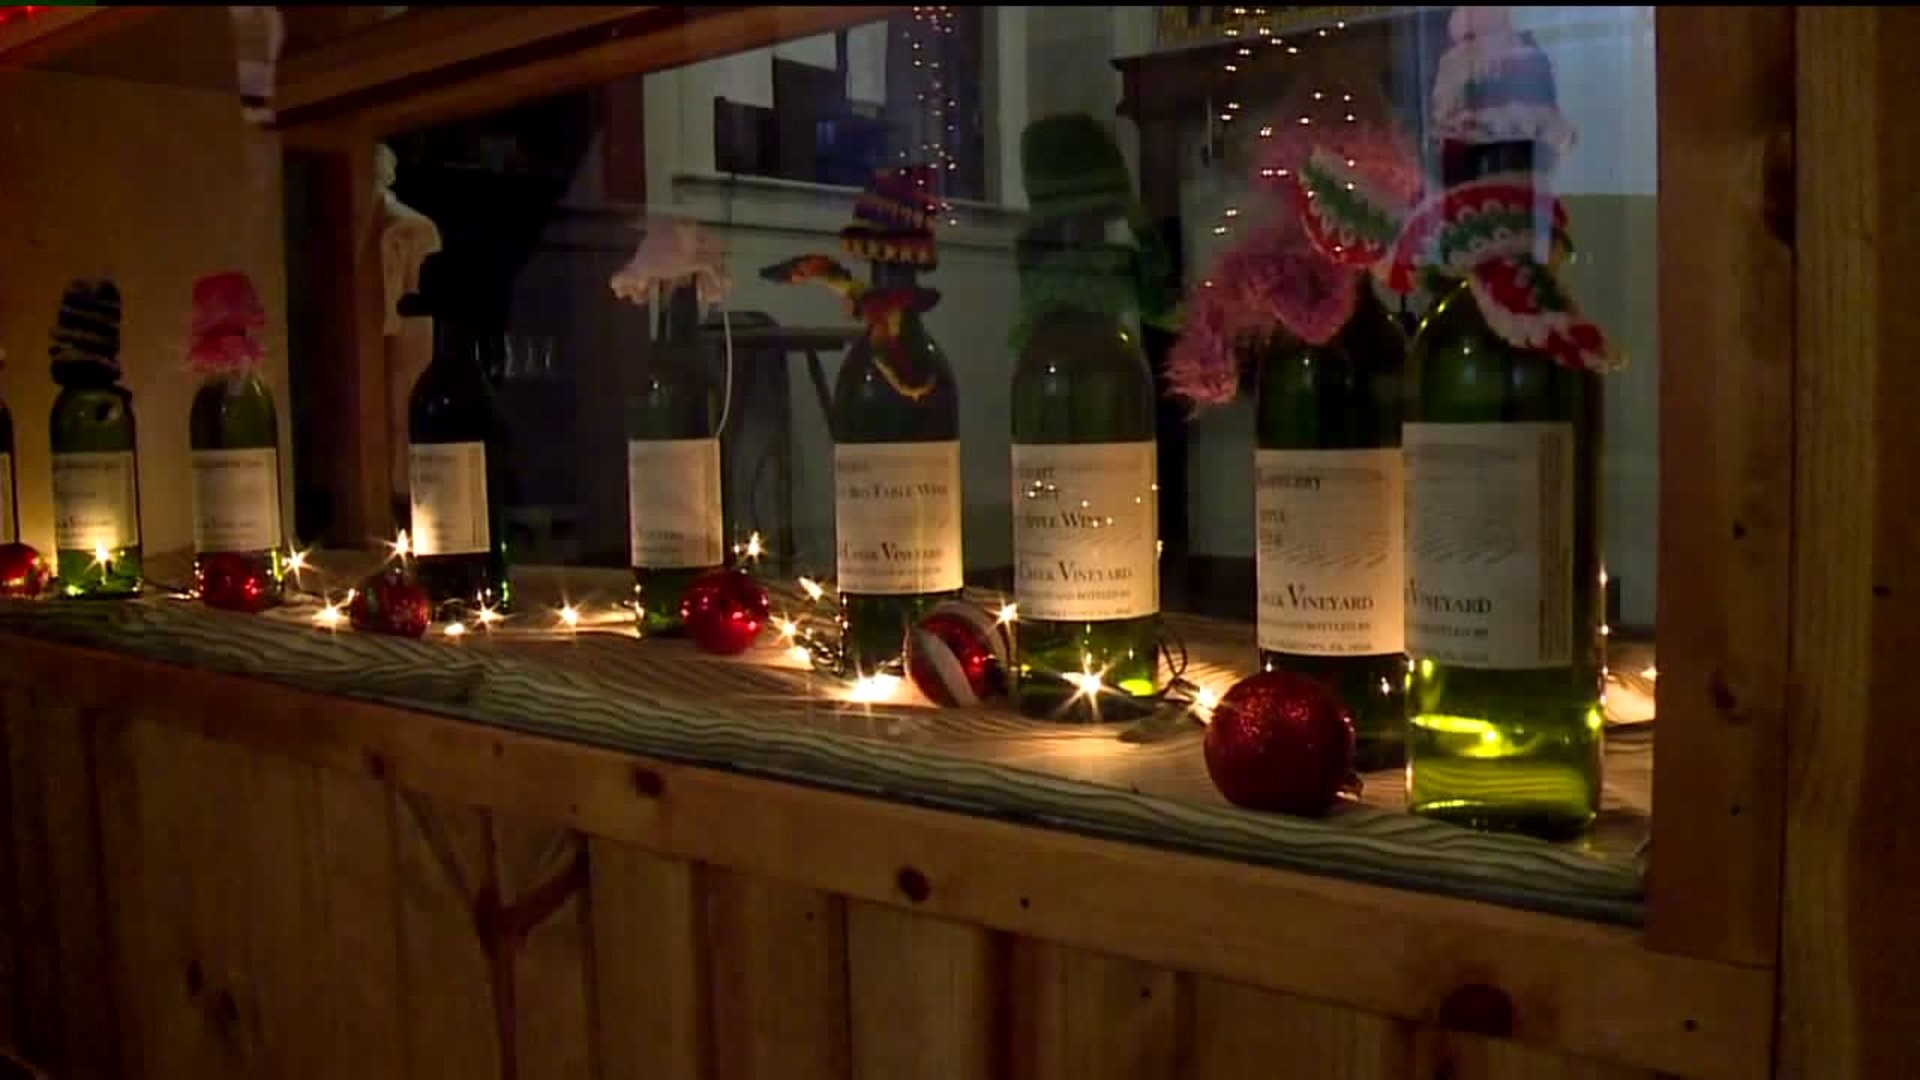 Pocono Wineries Cash In on Holiday Business